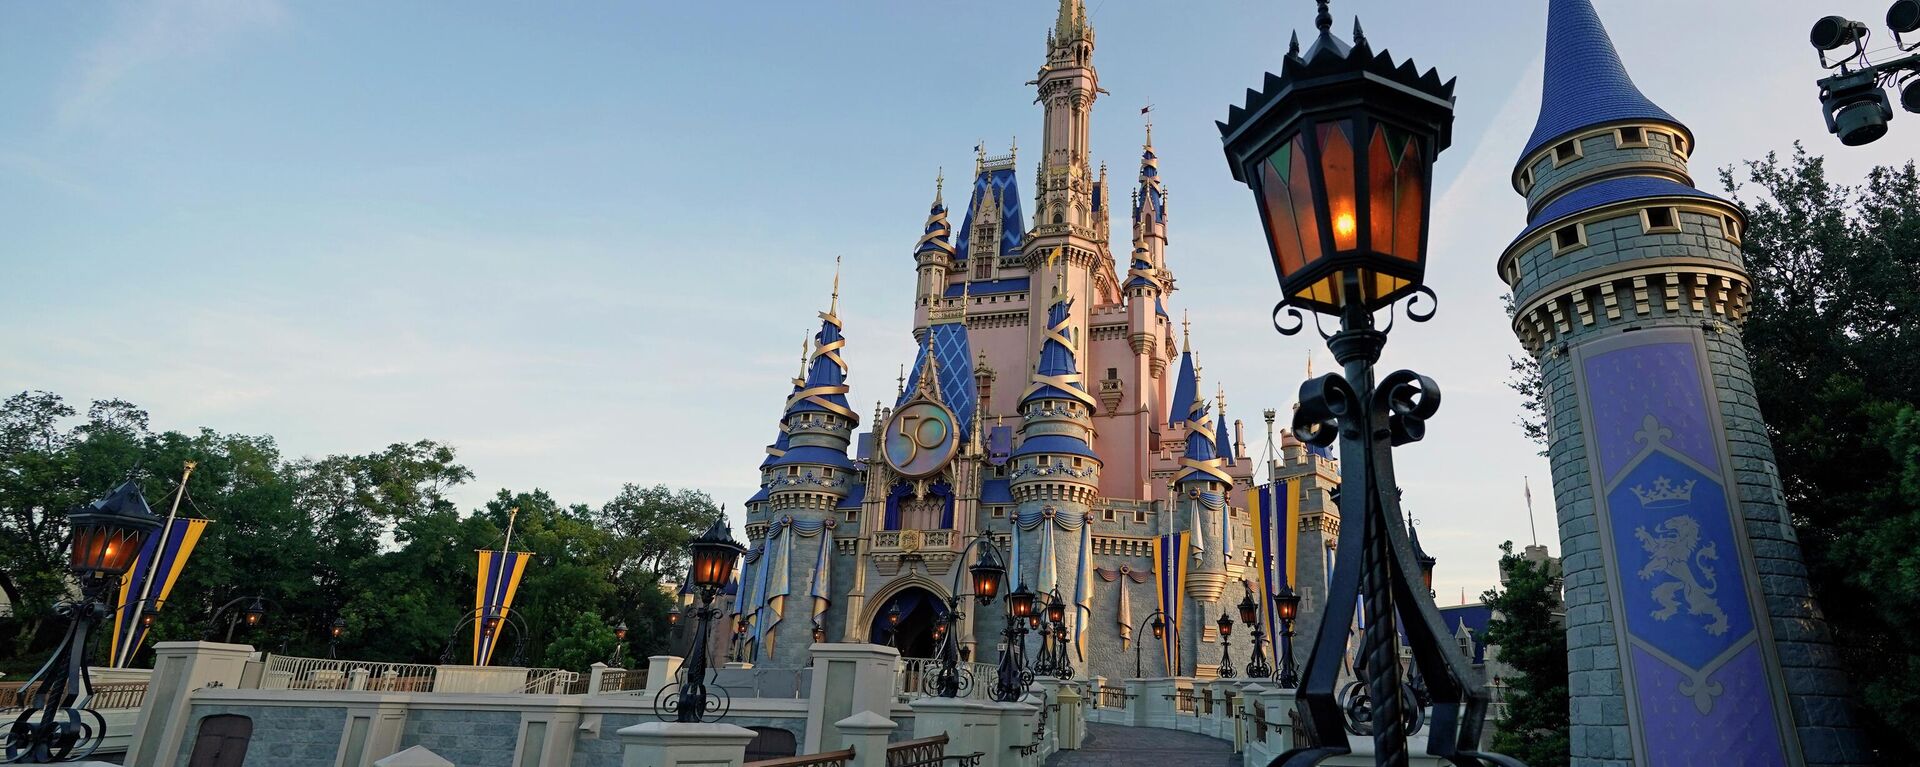 The newly painted Cinderella Castle at the Magic Kingdom at Walt Disney World is seen with the the crest to celebrate the 50th anniversary of the theme park Monday, Aug. 30, 2021, in Lake Buena Vista, Fla - Sputnik International, 1920, 20.04.2022